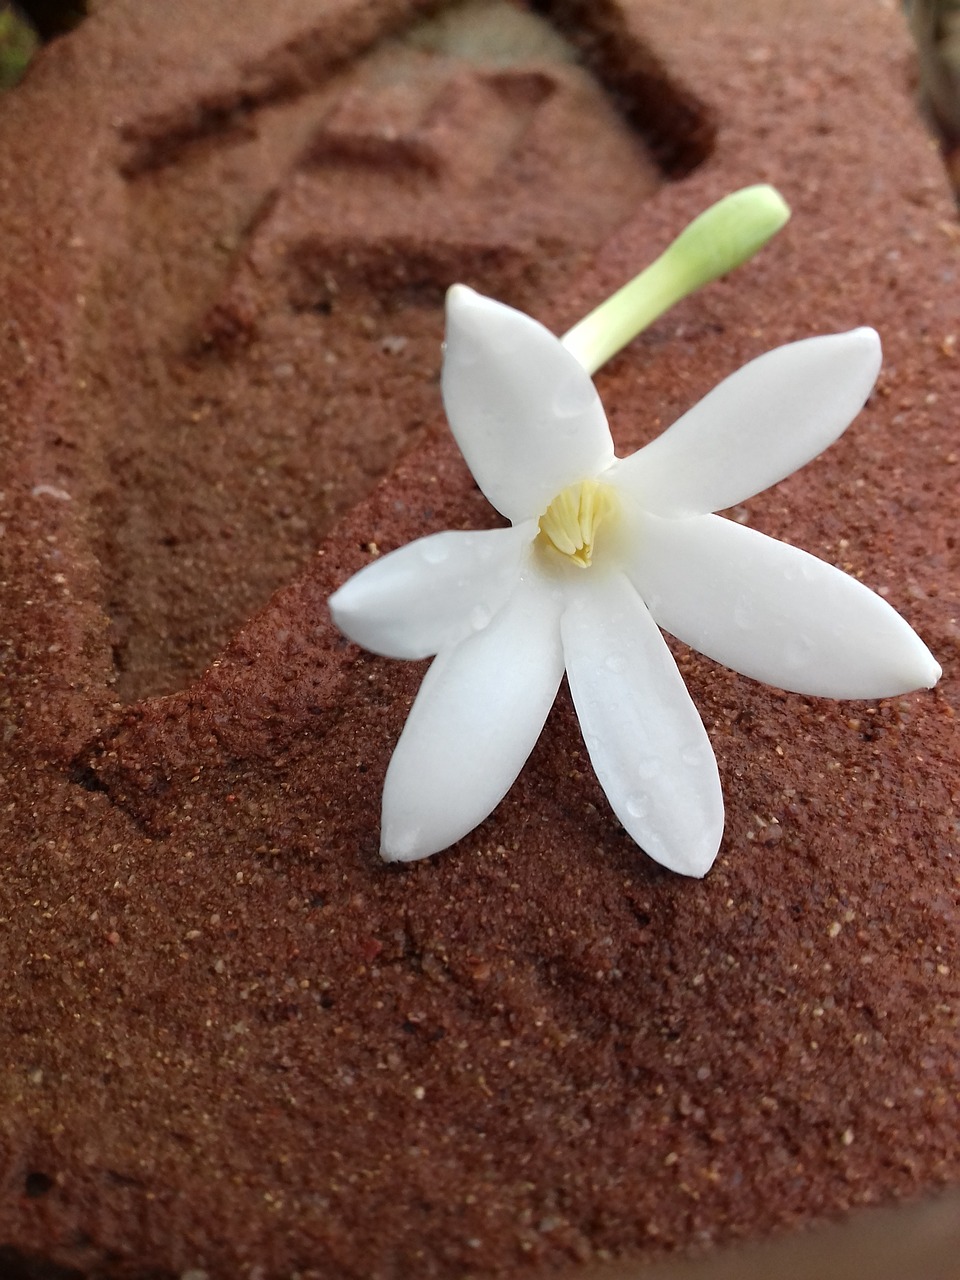 a white flower sitting on top of a piece of cake, minimalism, red dusty soil, jasmine, laos, michilin star